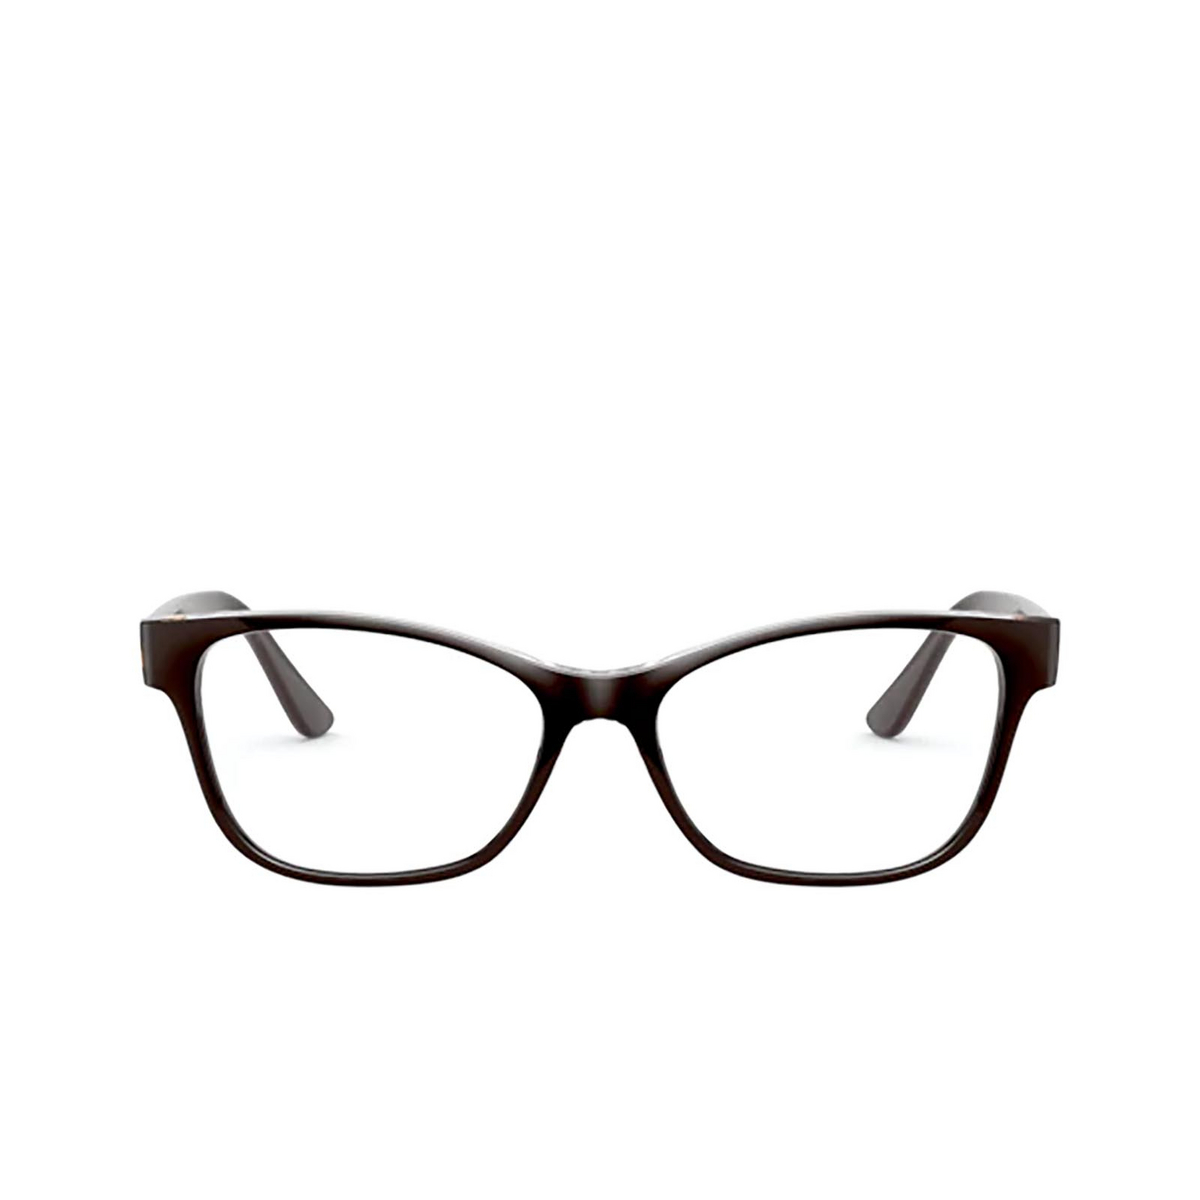 Vogue VO5335 Eyeglasses 2842 TOP BROWN / SERIGRAPHY - front view